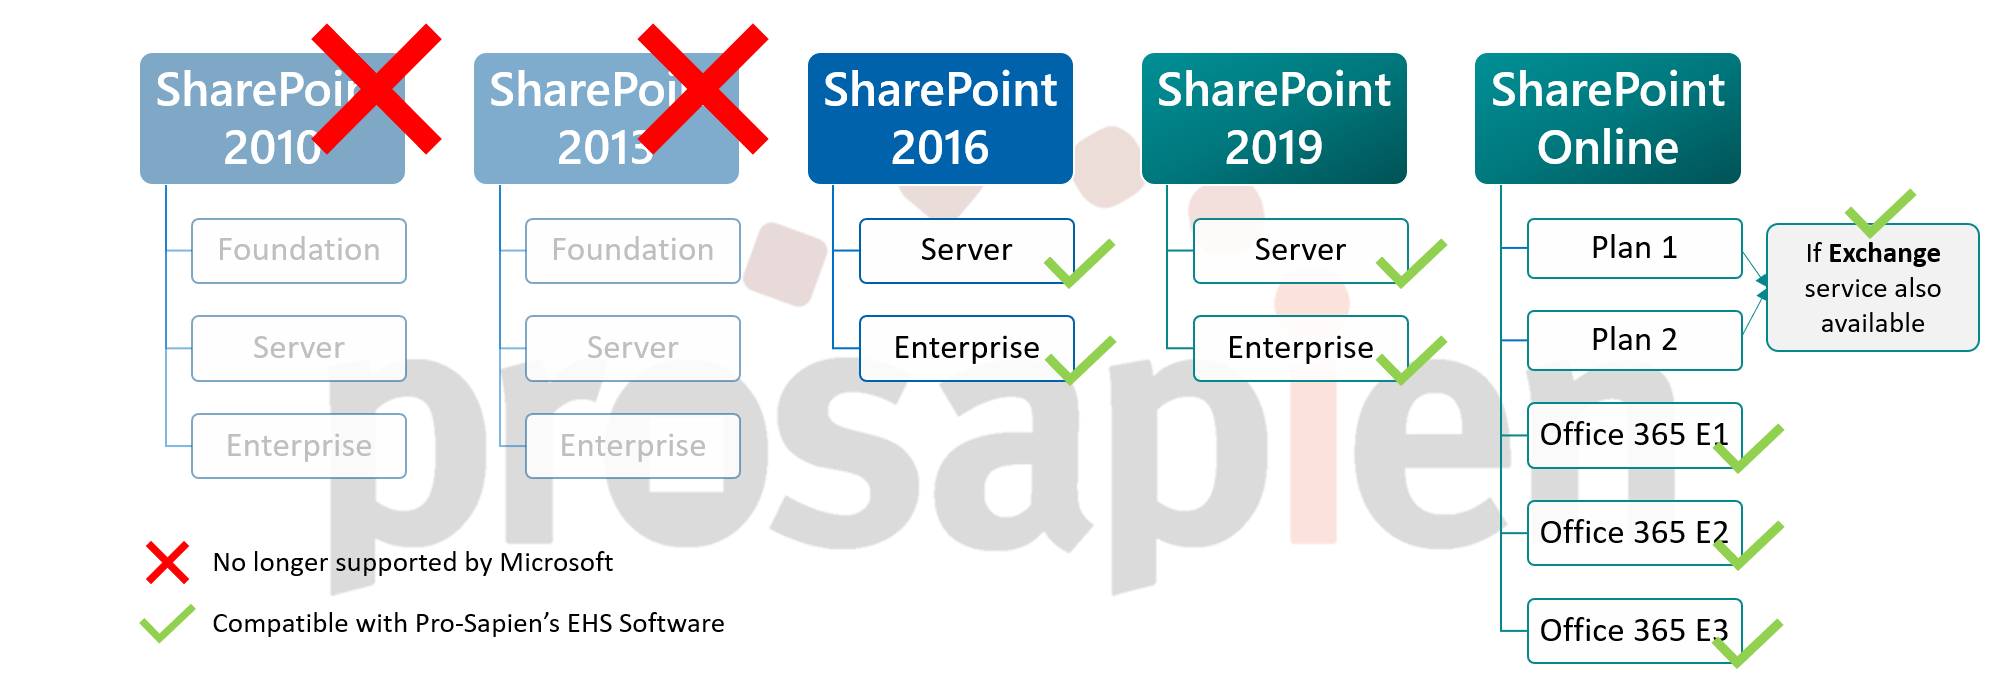 What Are The Different Versions Of Sharepoint?